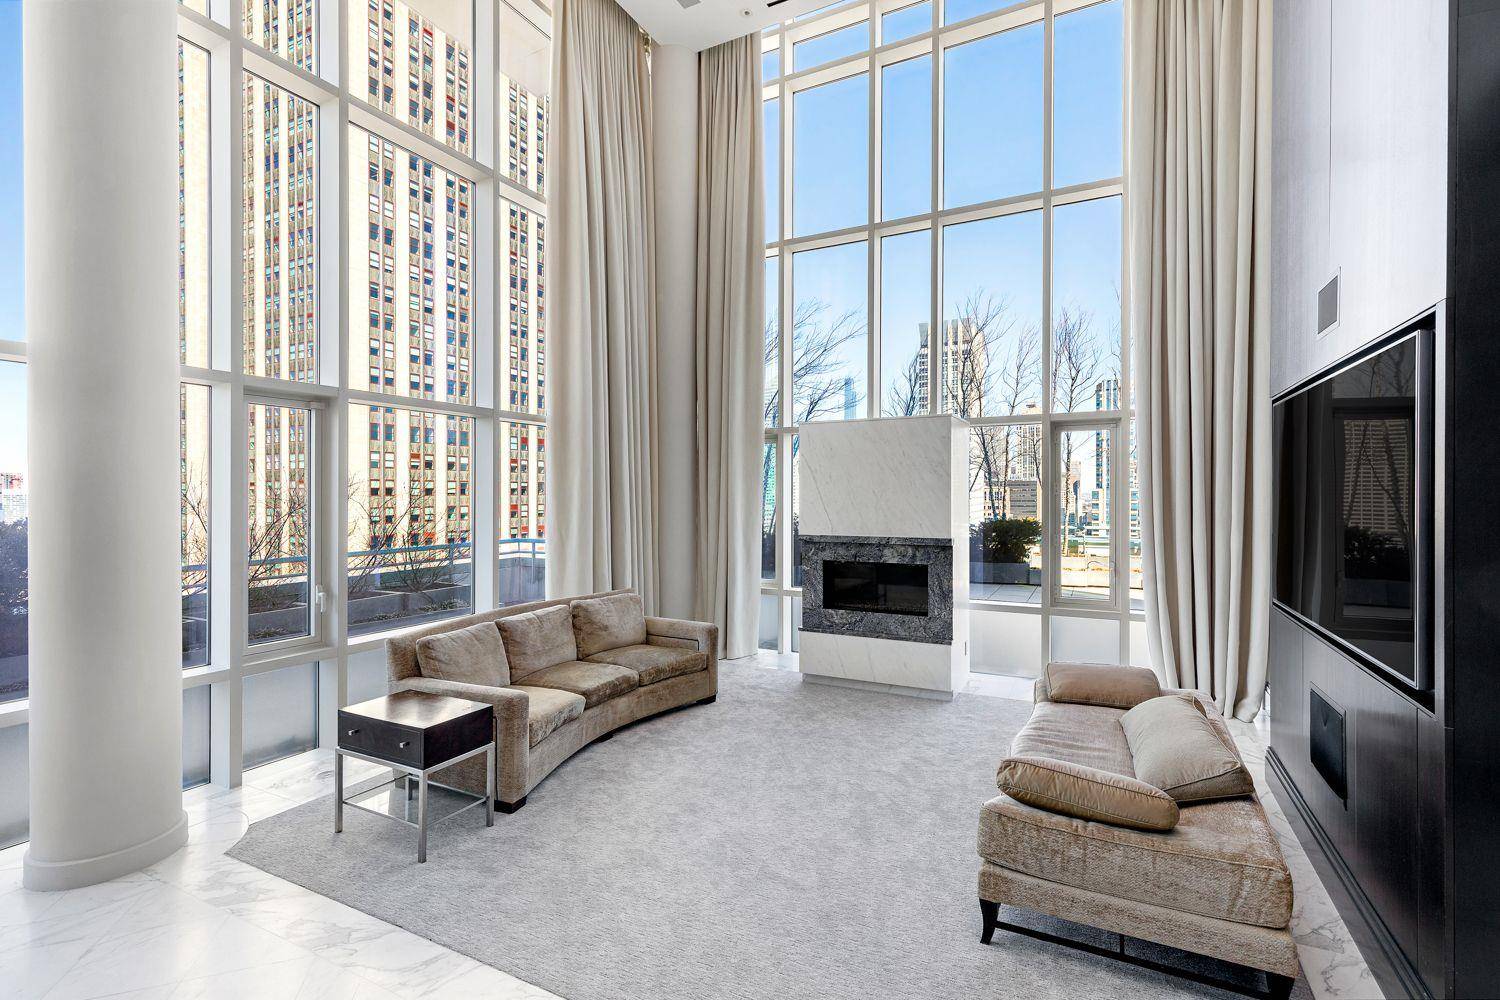 STUNNING, ONE OF A KIND PENTHOUSE A A APARTMENT FEATURES Dazzling views to the north, east and west from this serene retreat floating high above midtown Manhattan.